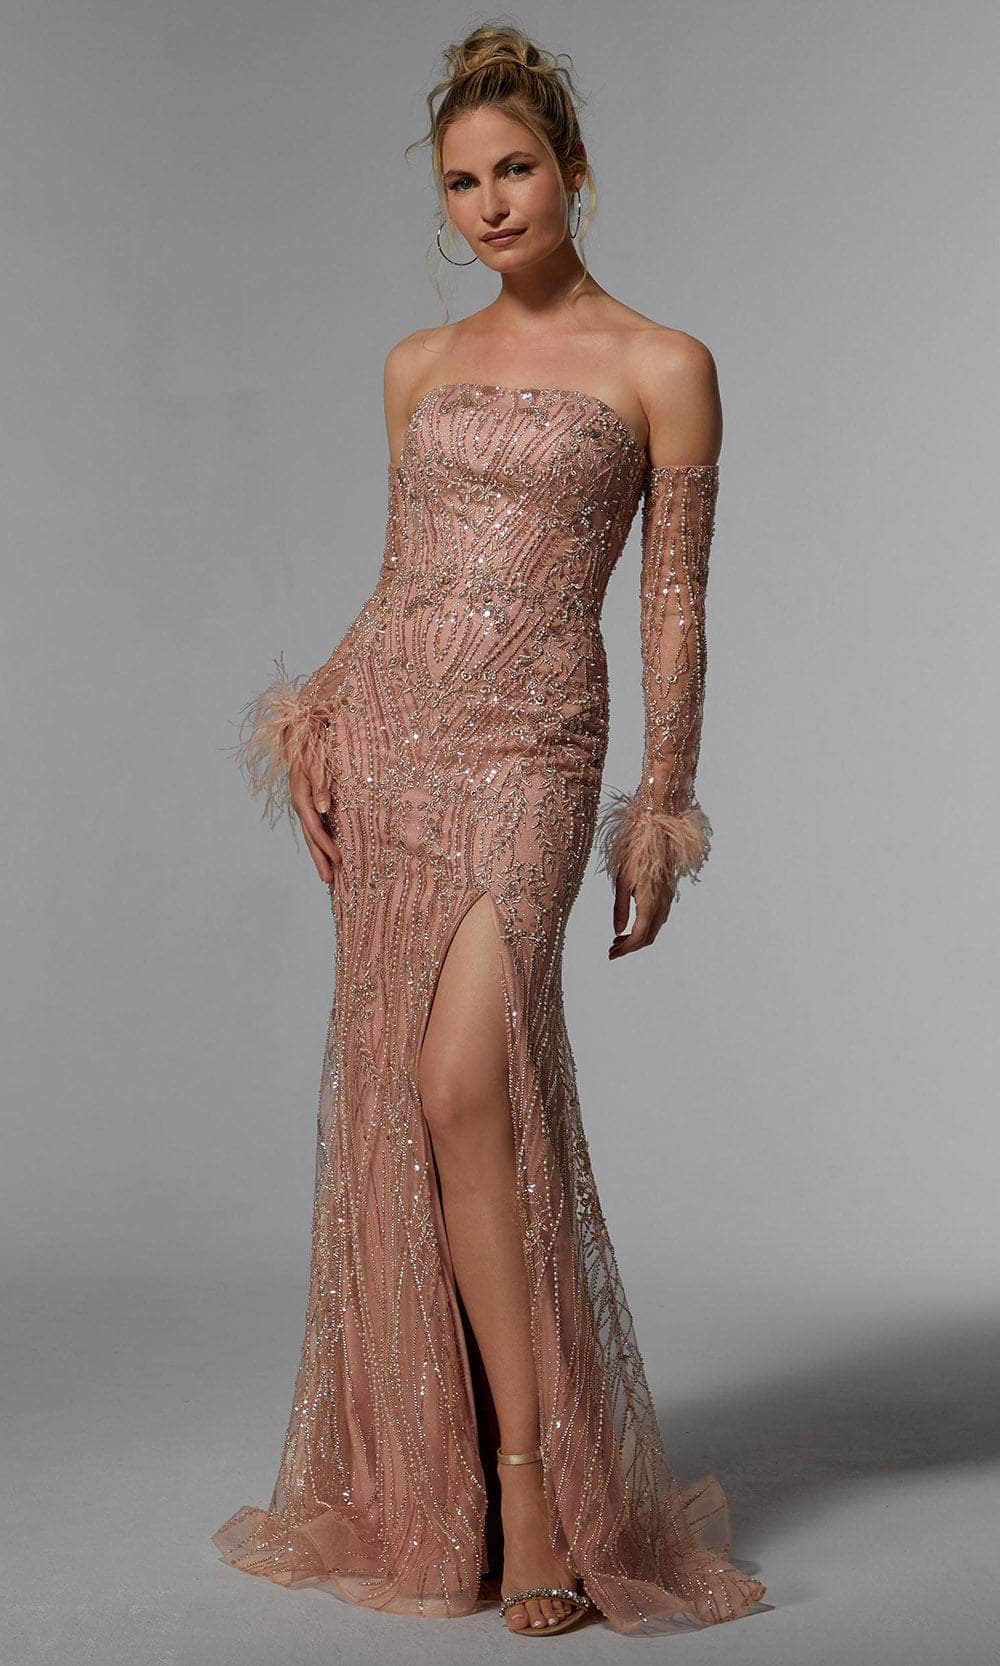 Image of MGNY by Mori Lee 72934 - Beaded High Slit Evening Dress